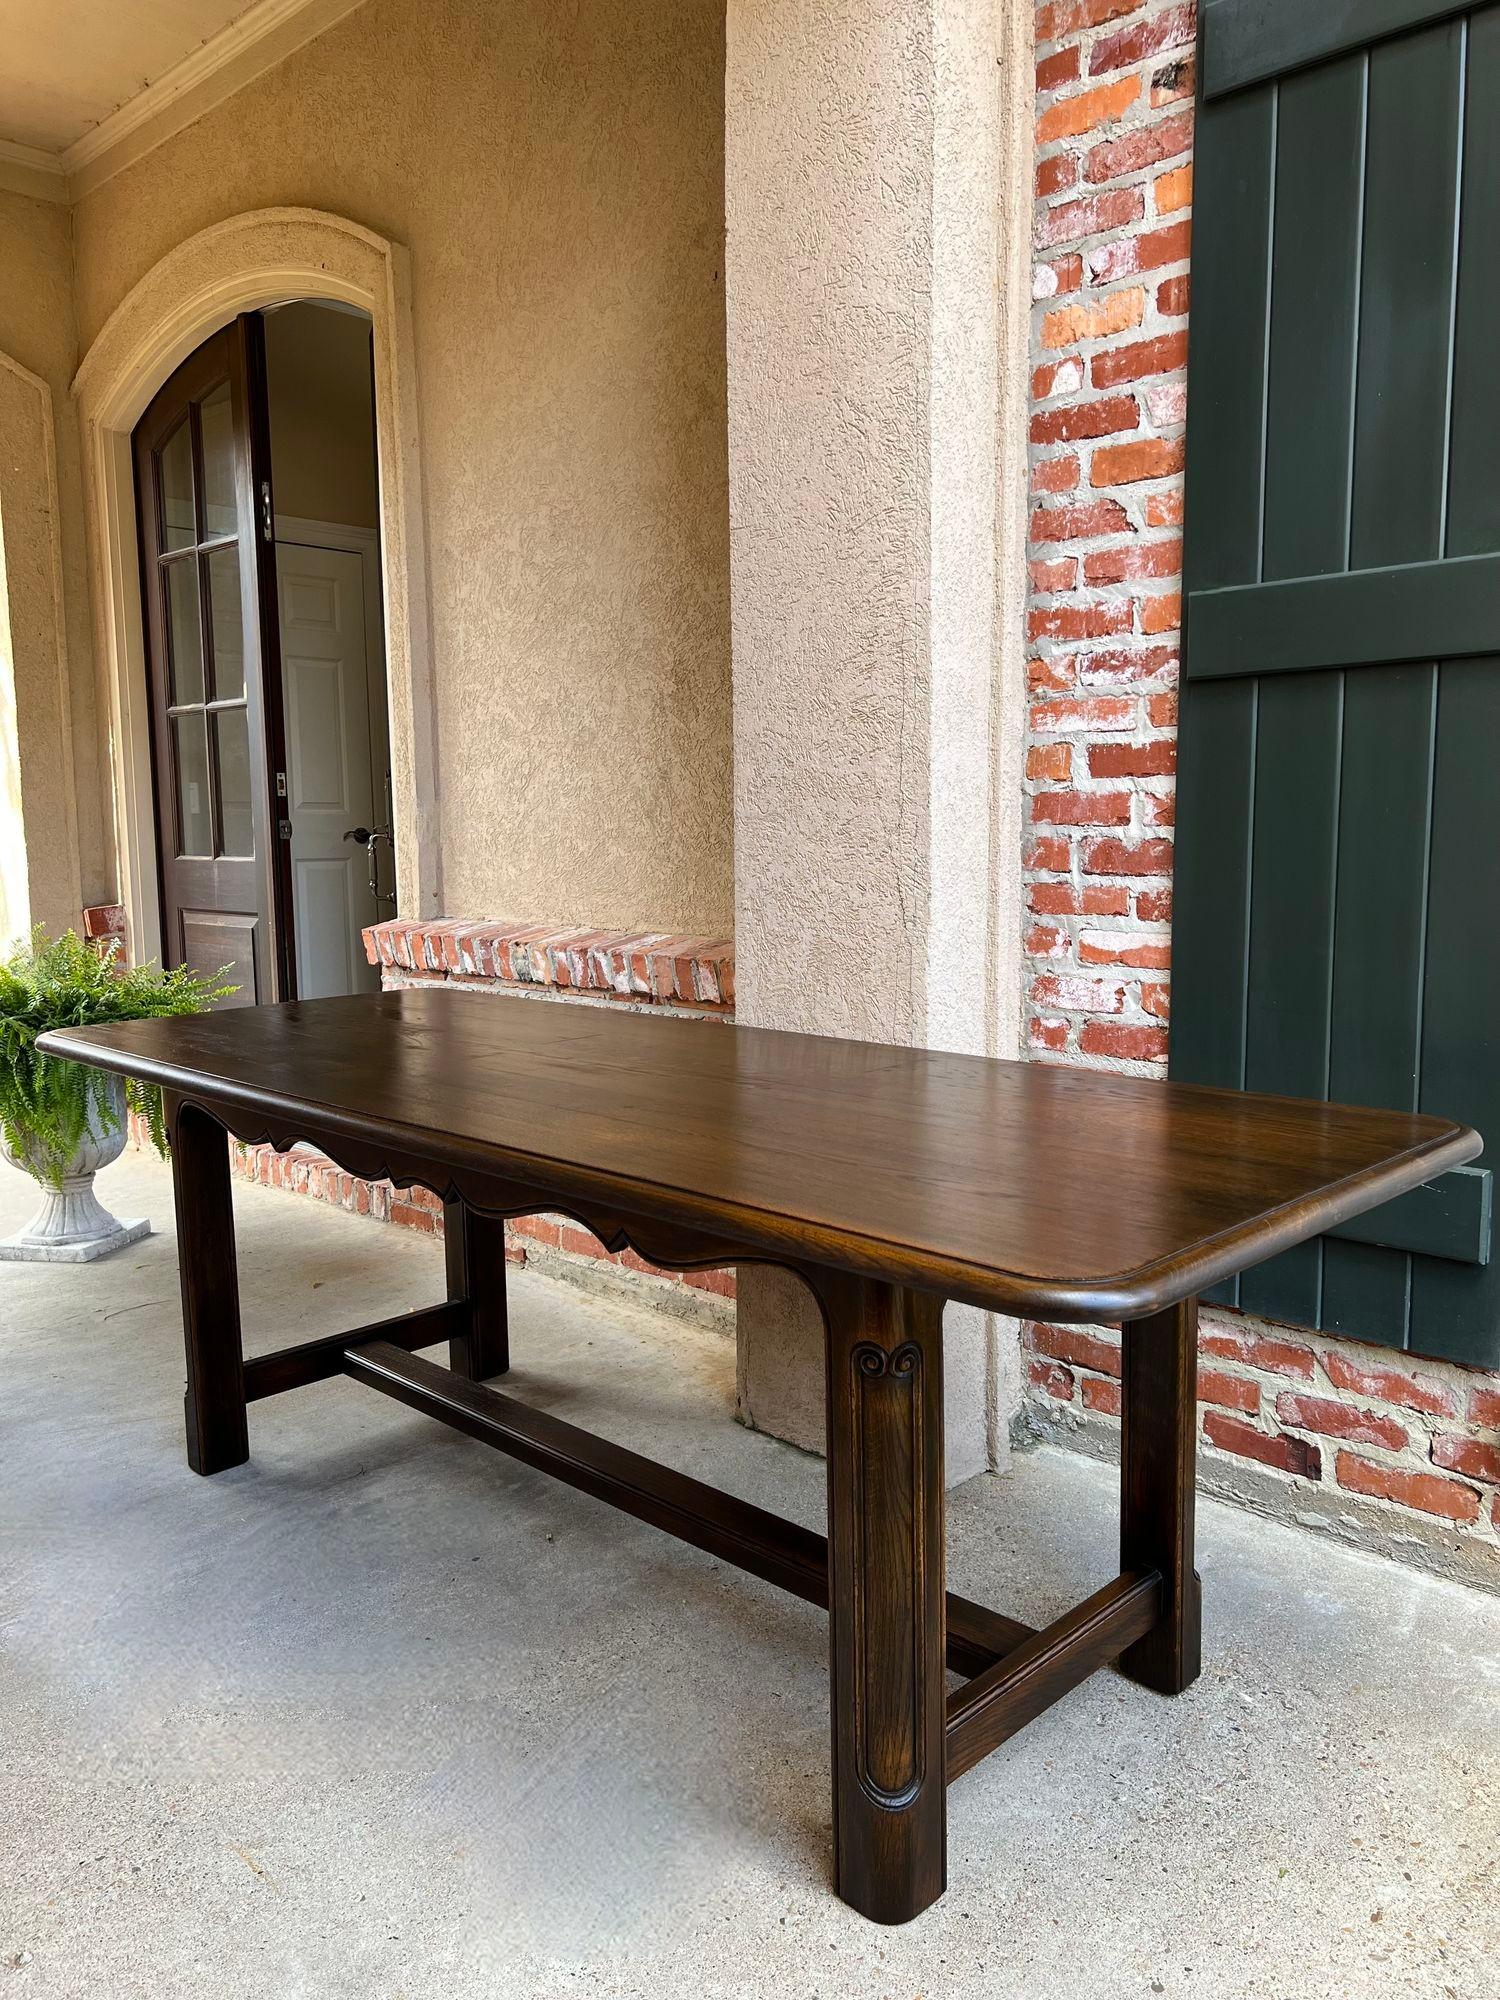 Antique French Oak Dining Farm Table Conference Office Desk LARGE 7 ft.

Direct from France, a gorgeous antique French carved oak dining table or conference/library table in a large 87” (over 7 ft)! These tables are one of our most requested